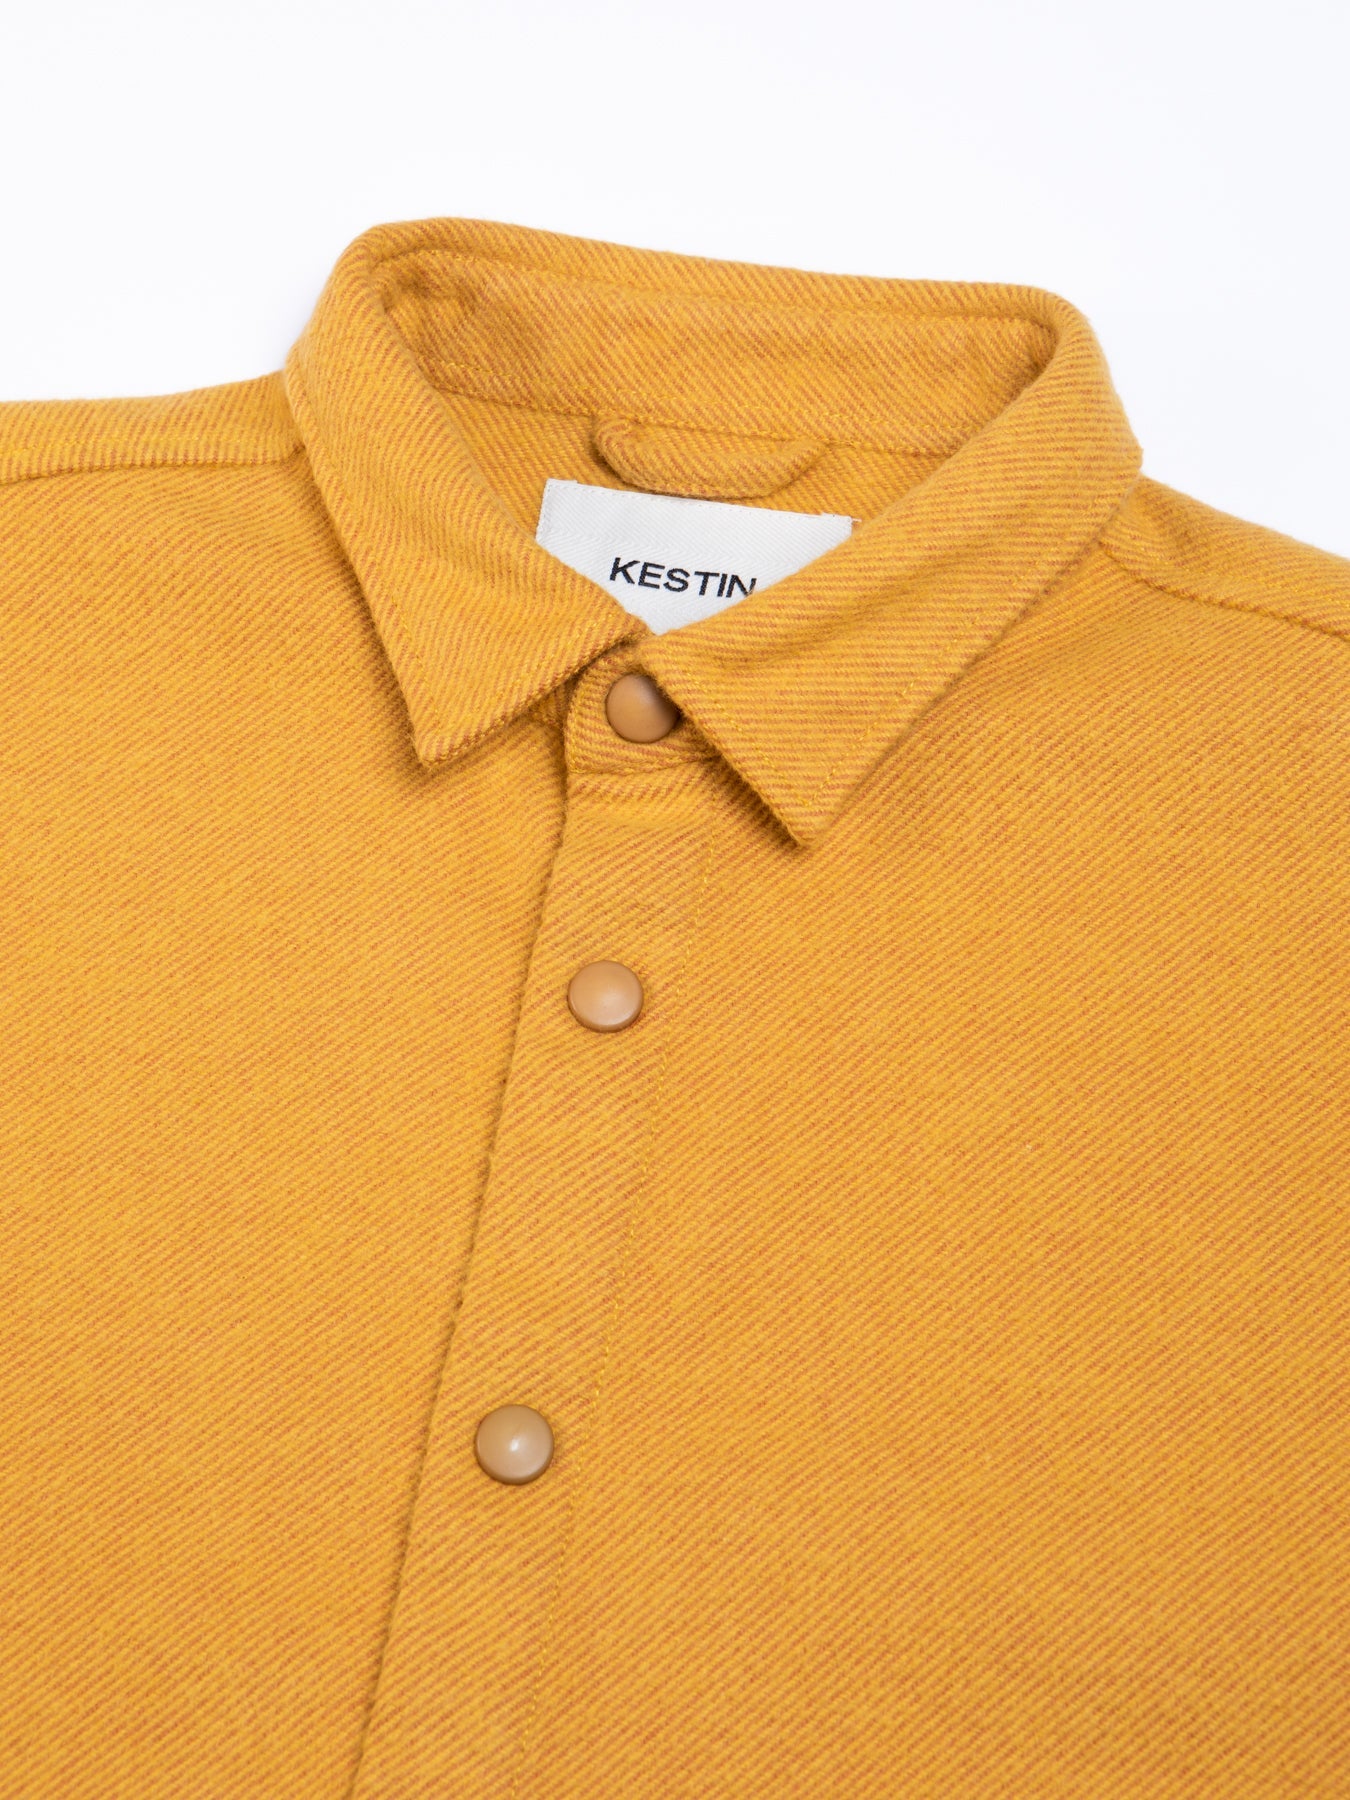 A close-up of the collar and snap-up front, on the Armadale Shirt by KESTIN.